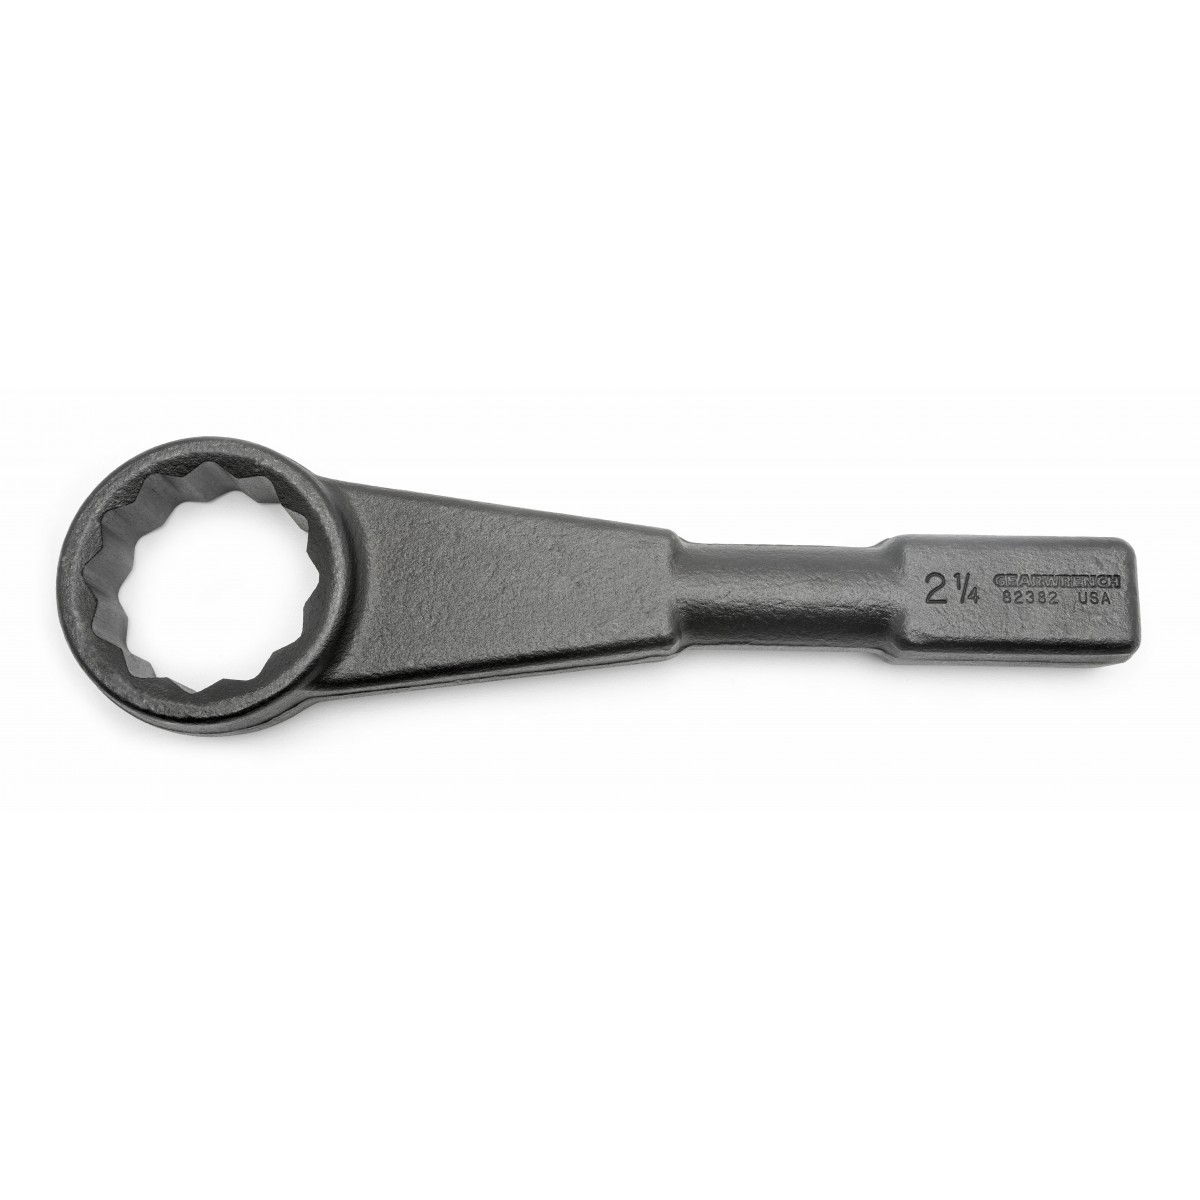 GEARWRENCH 2-1/4 12 Point Straight Slugging Wrench 82382 